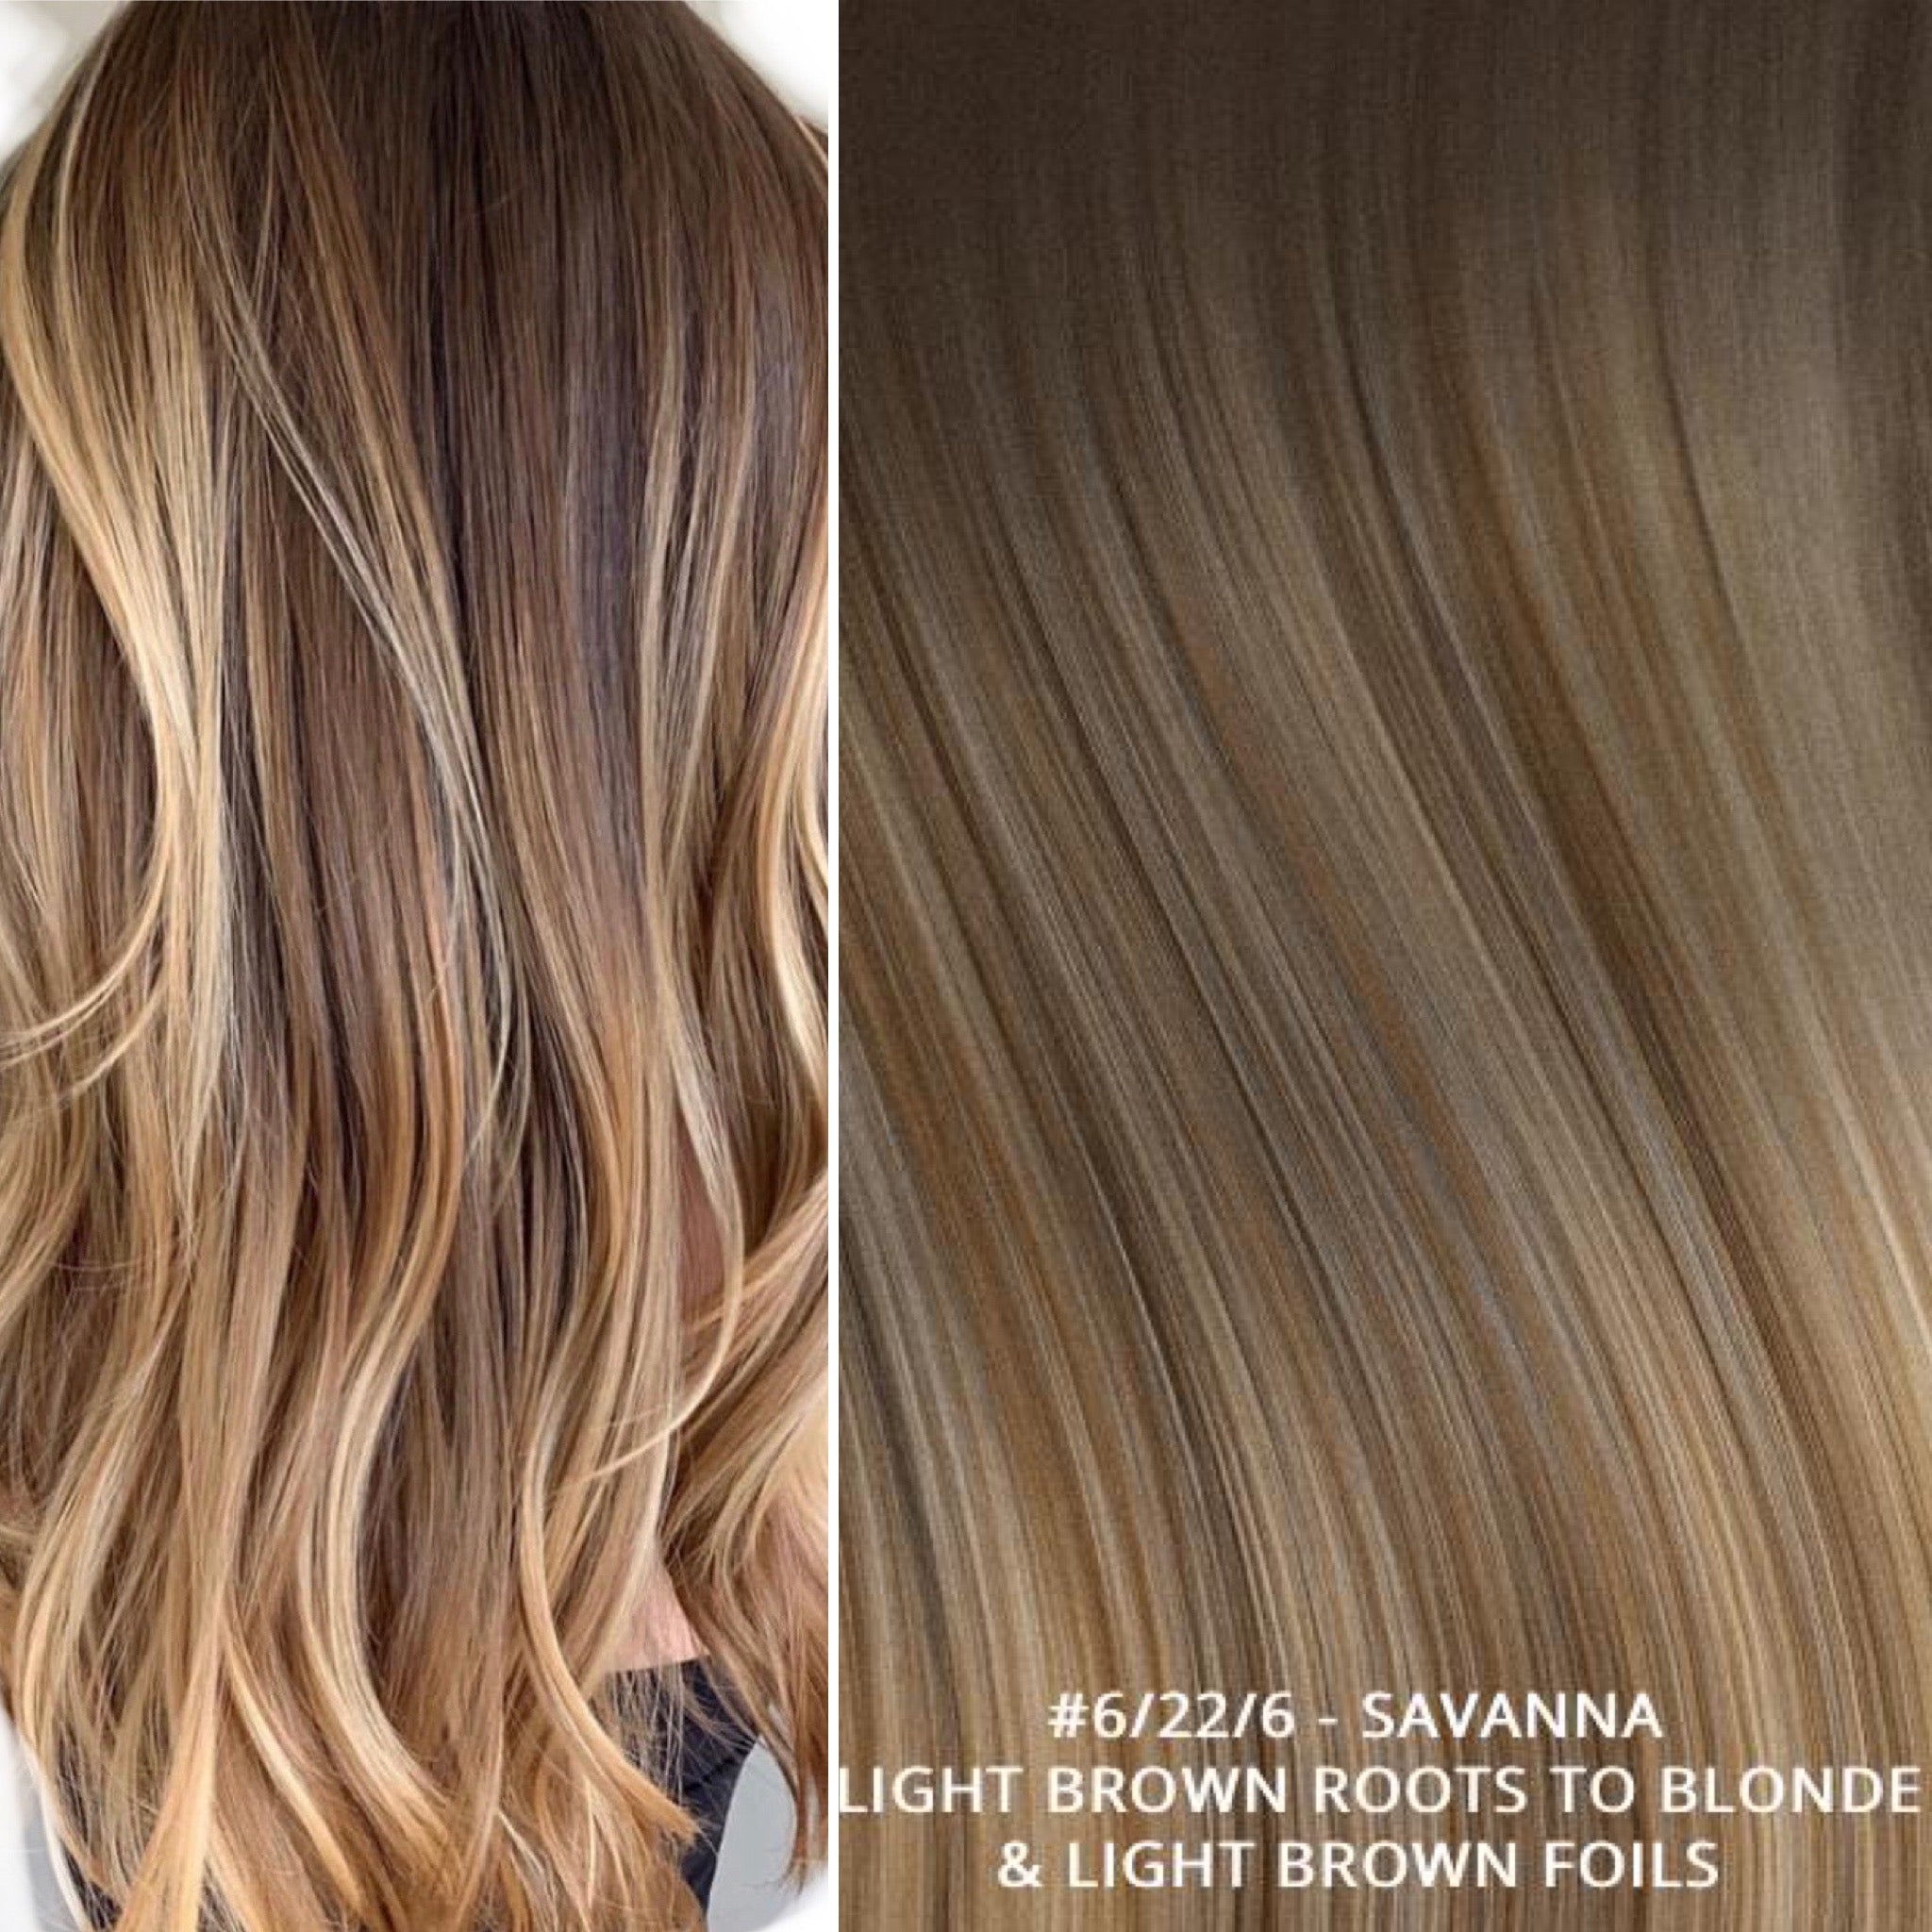 RUSSIAN CLIP IN BALAYAGE OMBRE HAIR EXTENSIONS #6/22/6 - SAVANNA - LIGHT BROWN ROOTS TO BLONDE & LIGHT BROWN FOILS